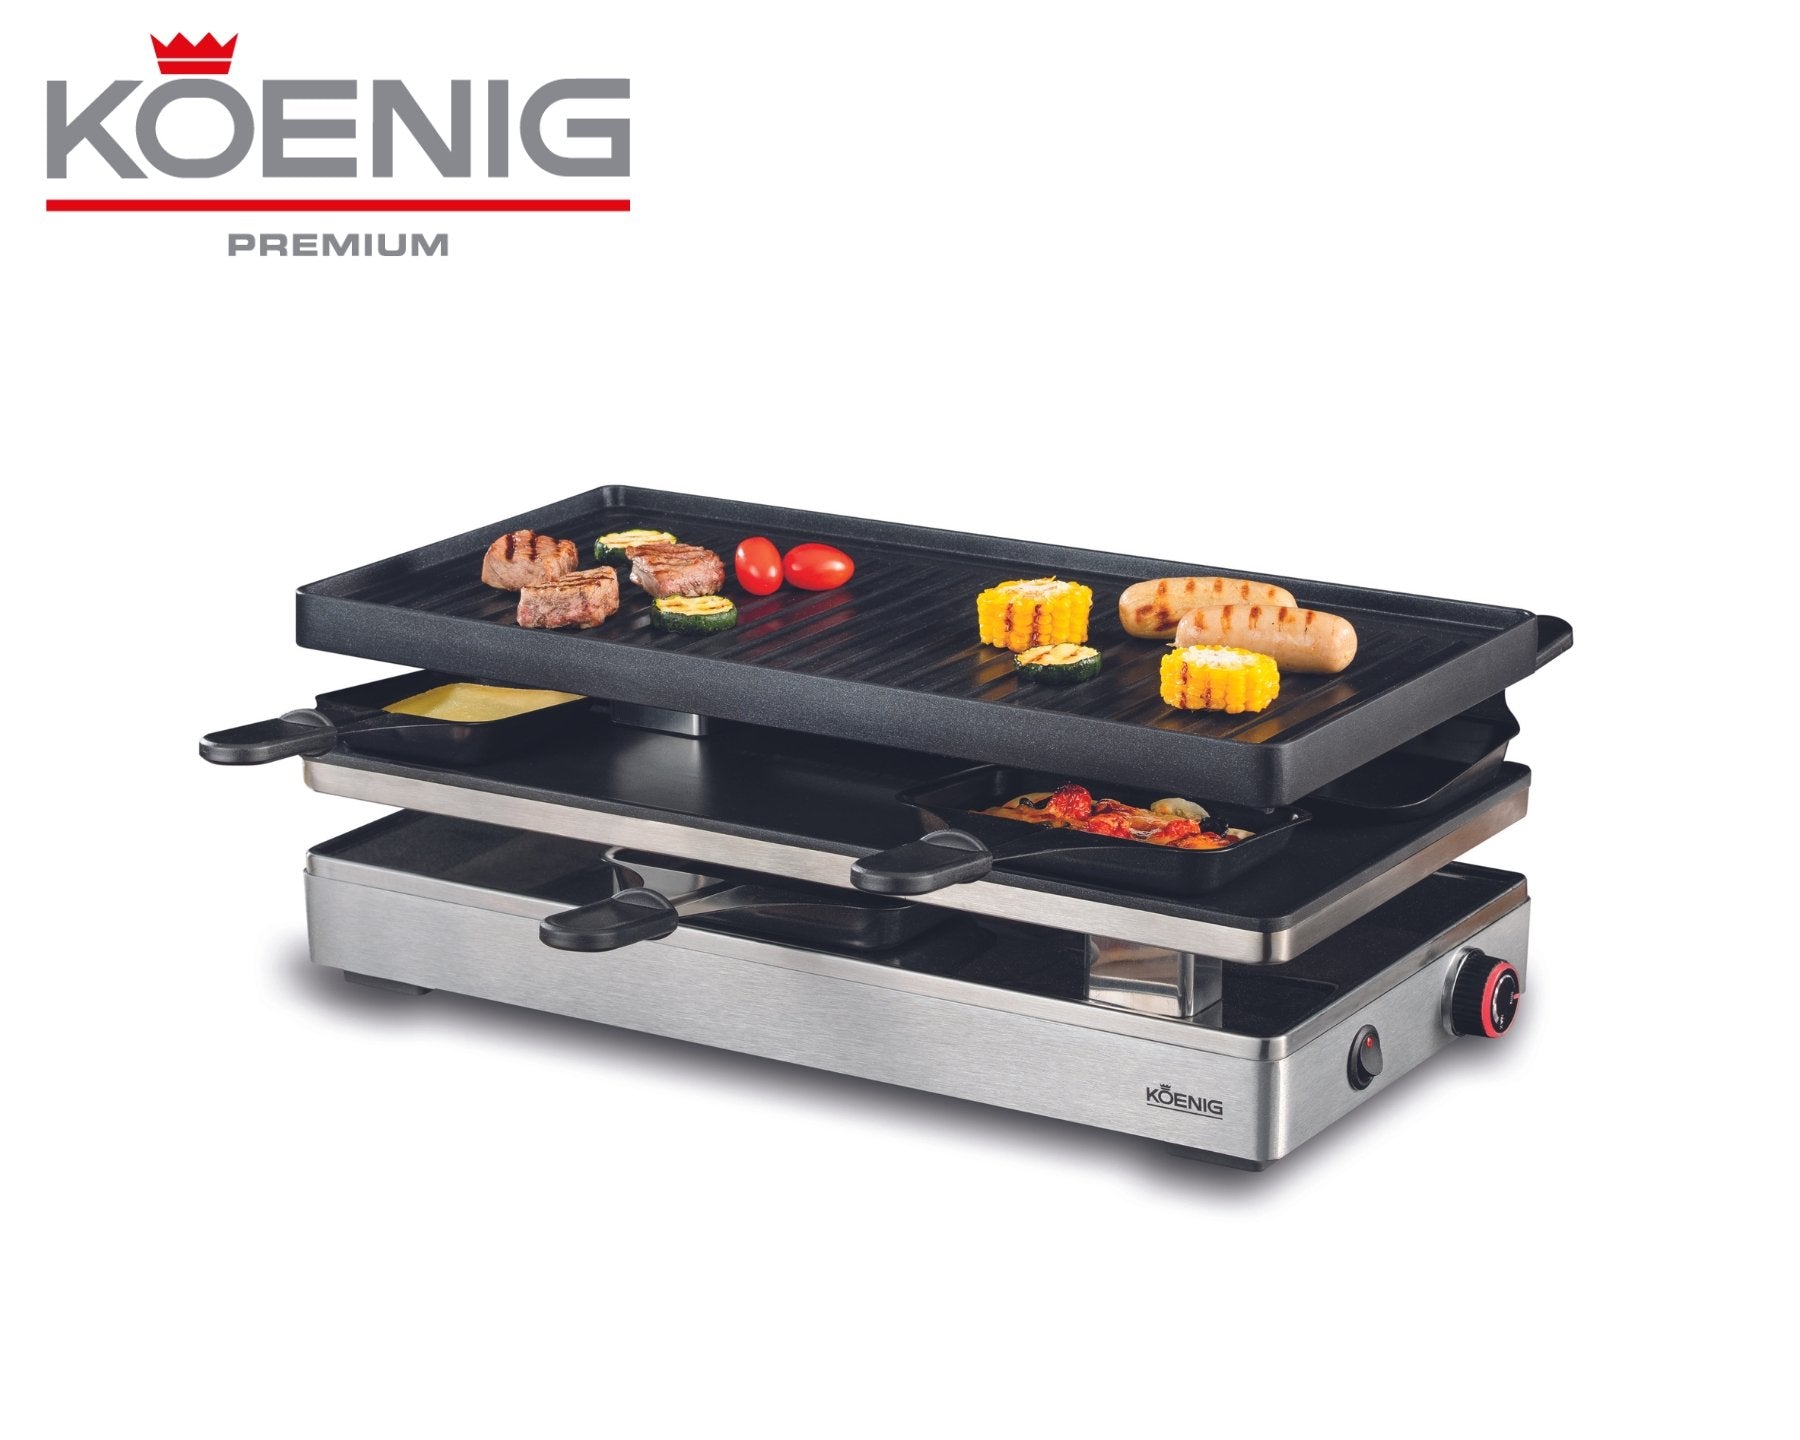 Koenig Pizza Raclette-Grill 4 in 1 - kitchen-more.ch